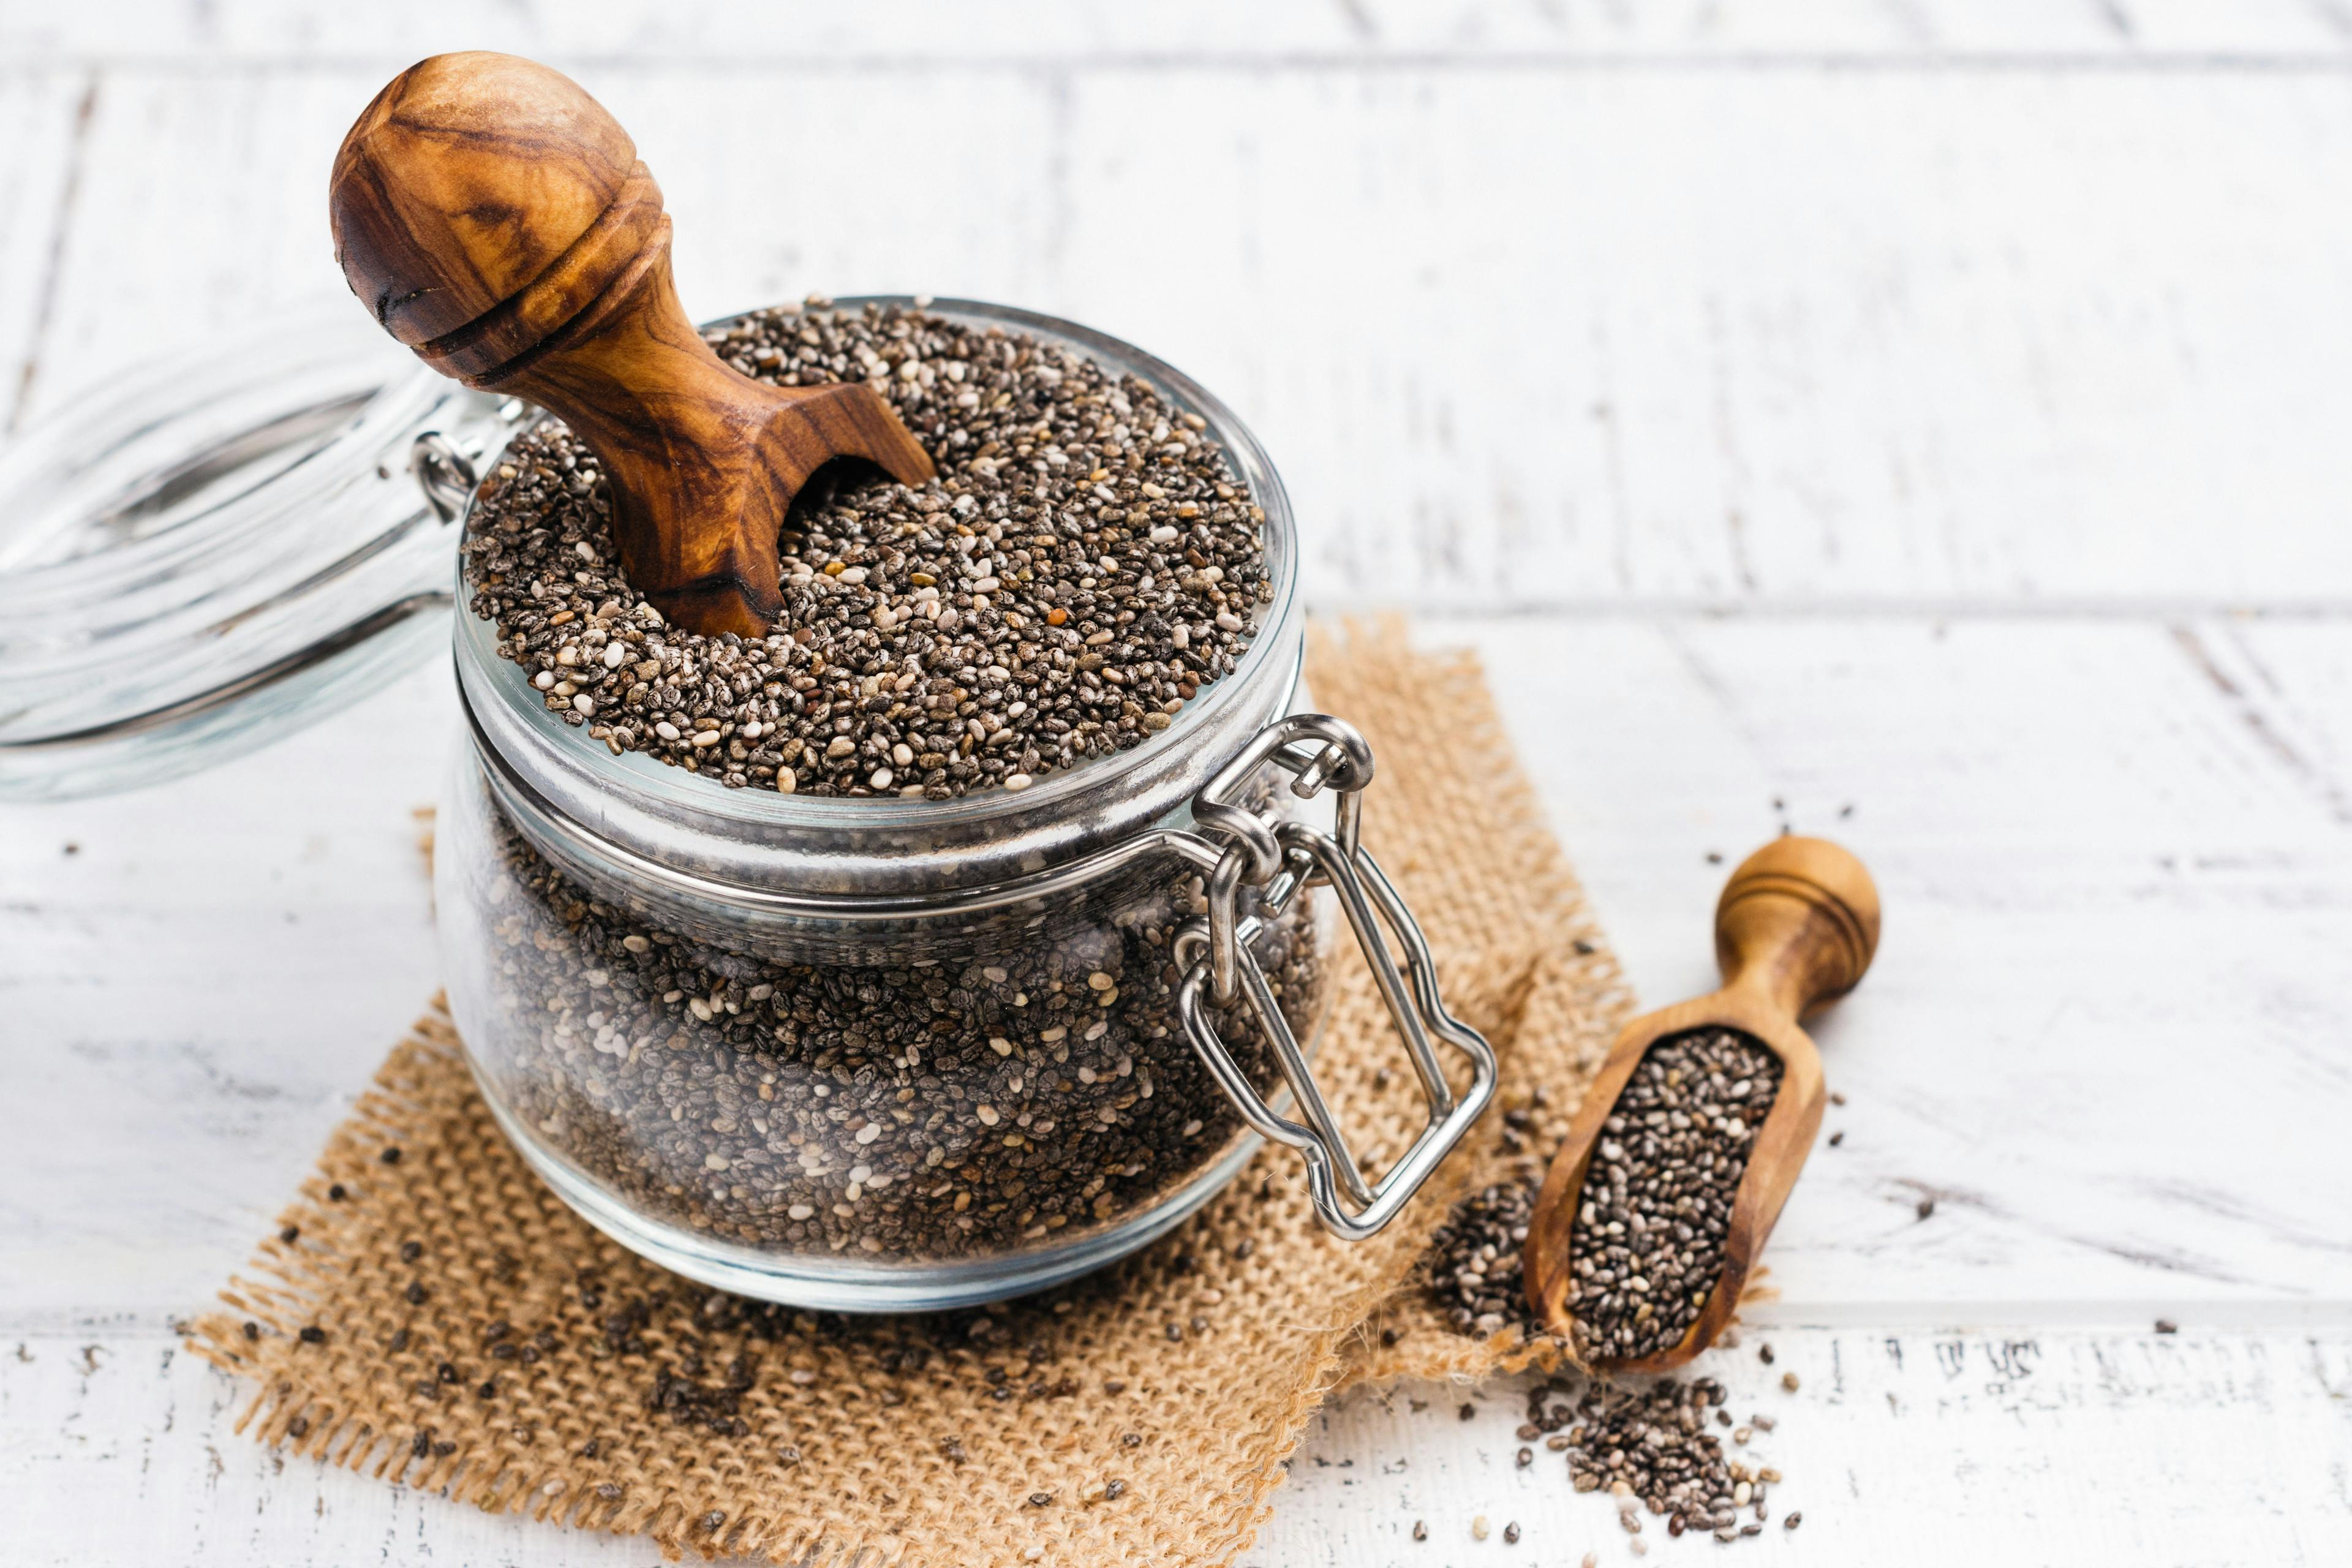 Chia is an herbaceous plant with nutrient-dense seeds. Image Credit: © happy_lark - stock.adobe.com